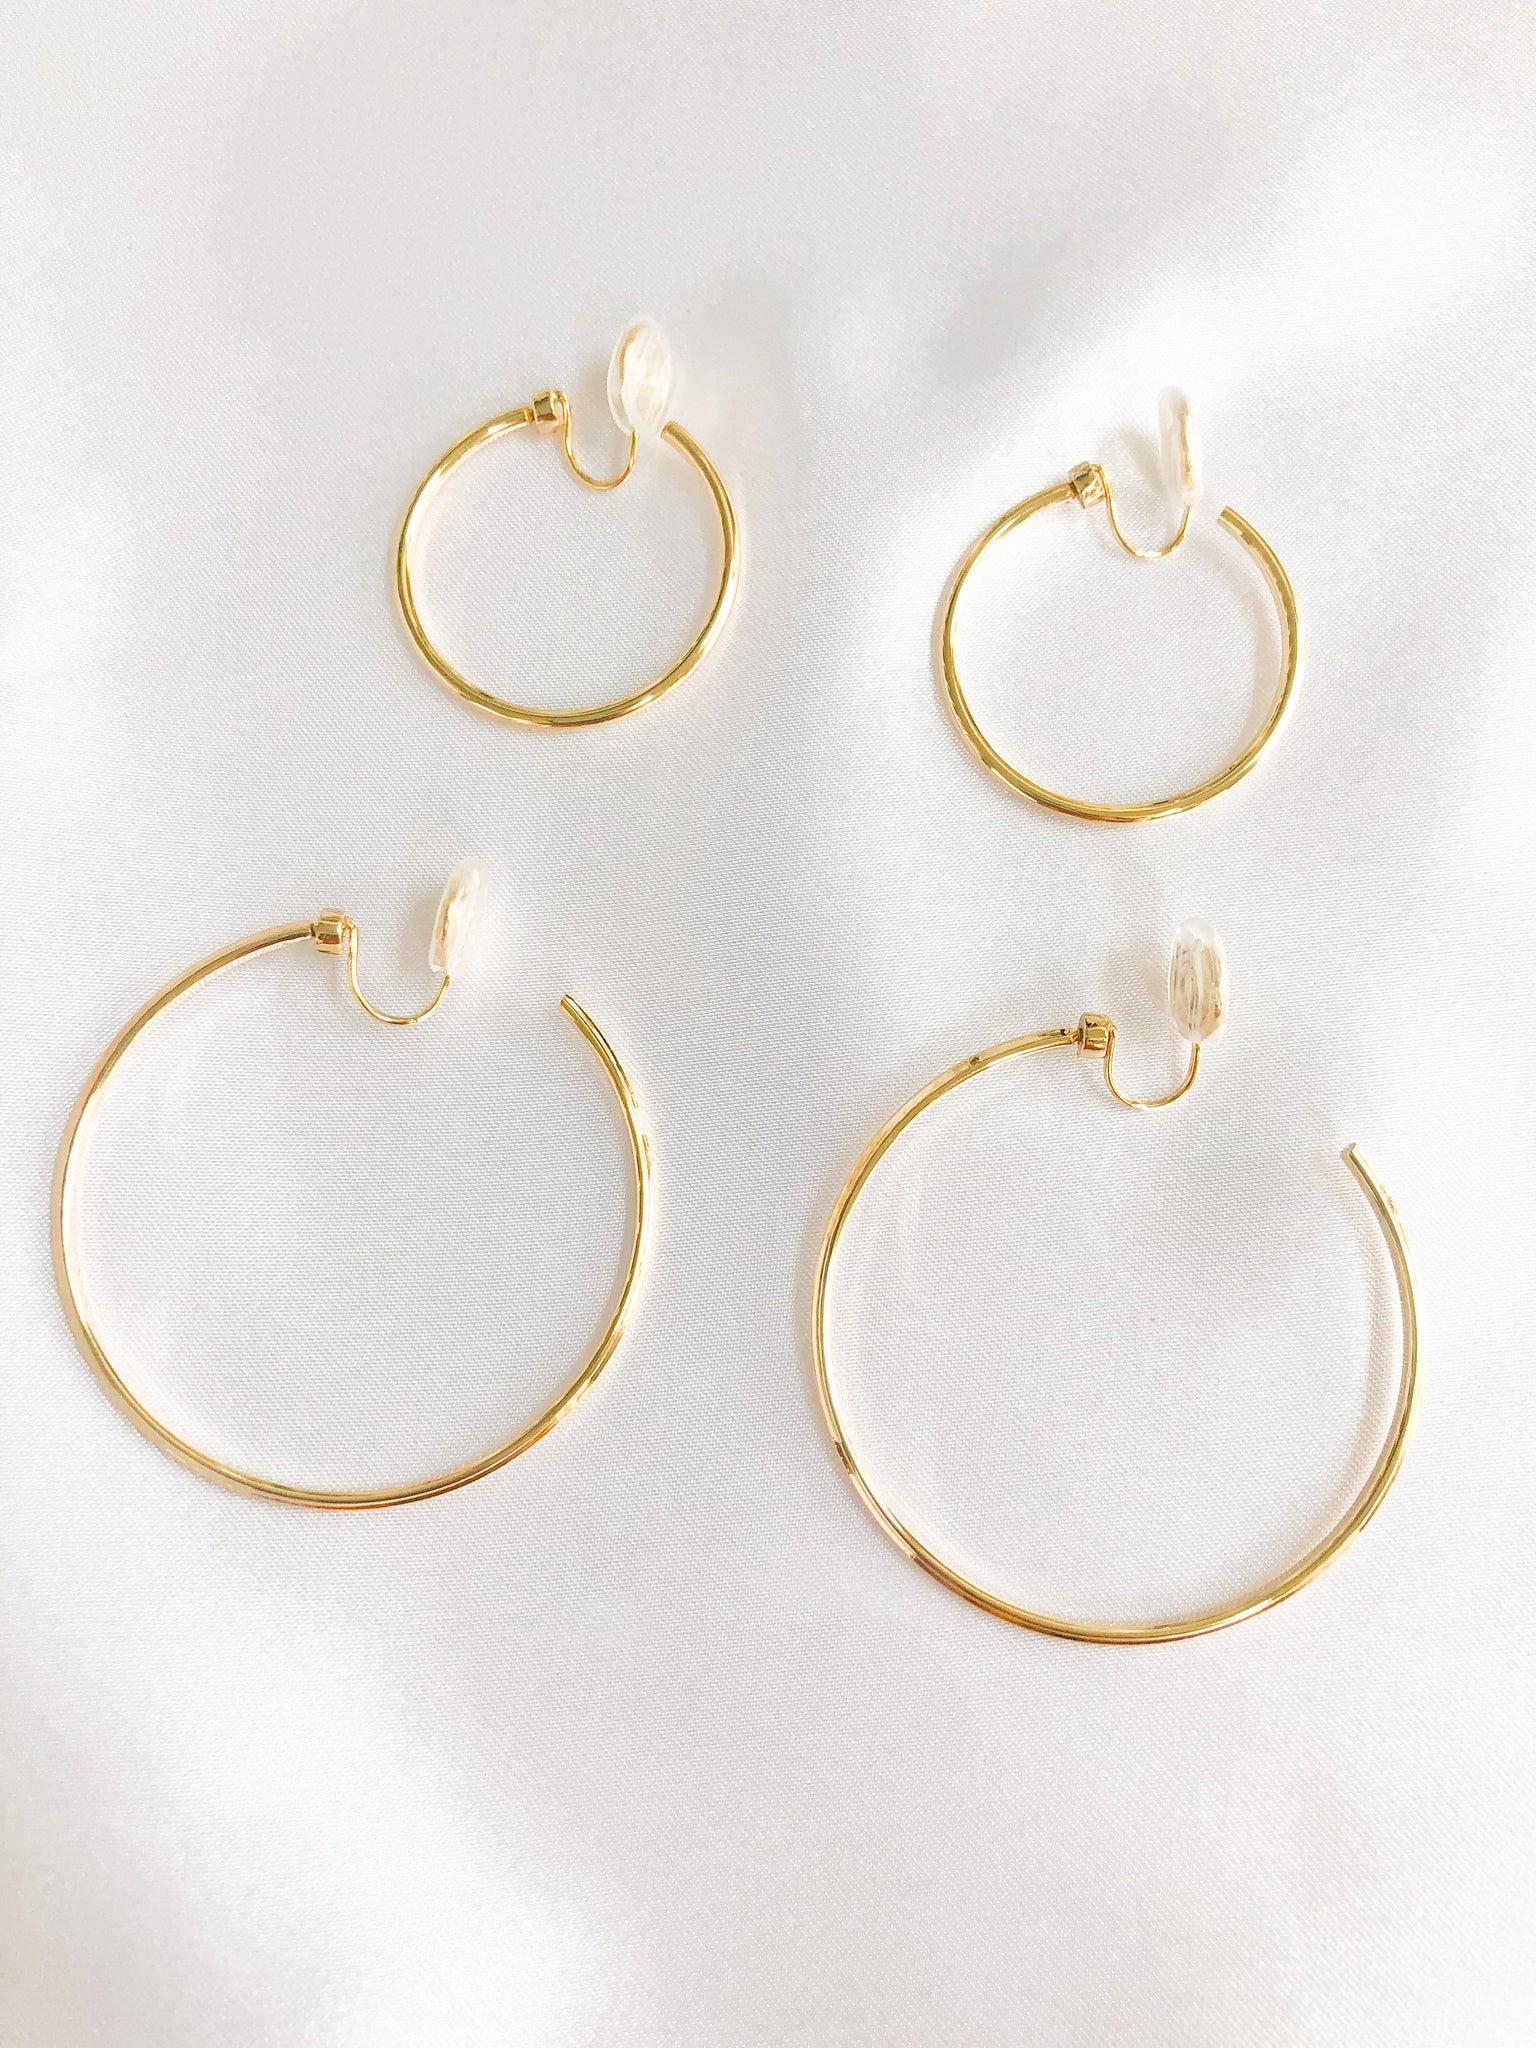 Elevate your jewelry collection with our stunning small and large clip-on hoop earrings bundle. This bundle includes two pairs of beautiful hoop earrings, one small and one large, both designed to be easily clipped on for a hassle-free accessory choice. The small hoops measure approximately 3.2cm in diameter, while the large hoops measure approximately 5 cm in diameter, providing you with options for both understated and bold looks. 